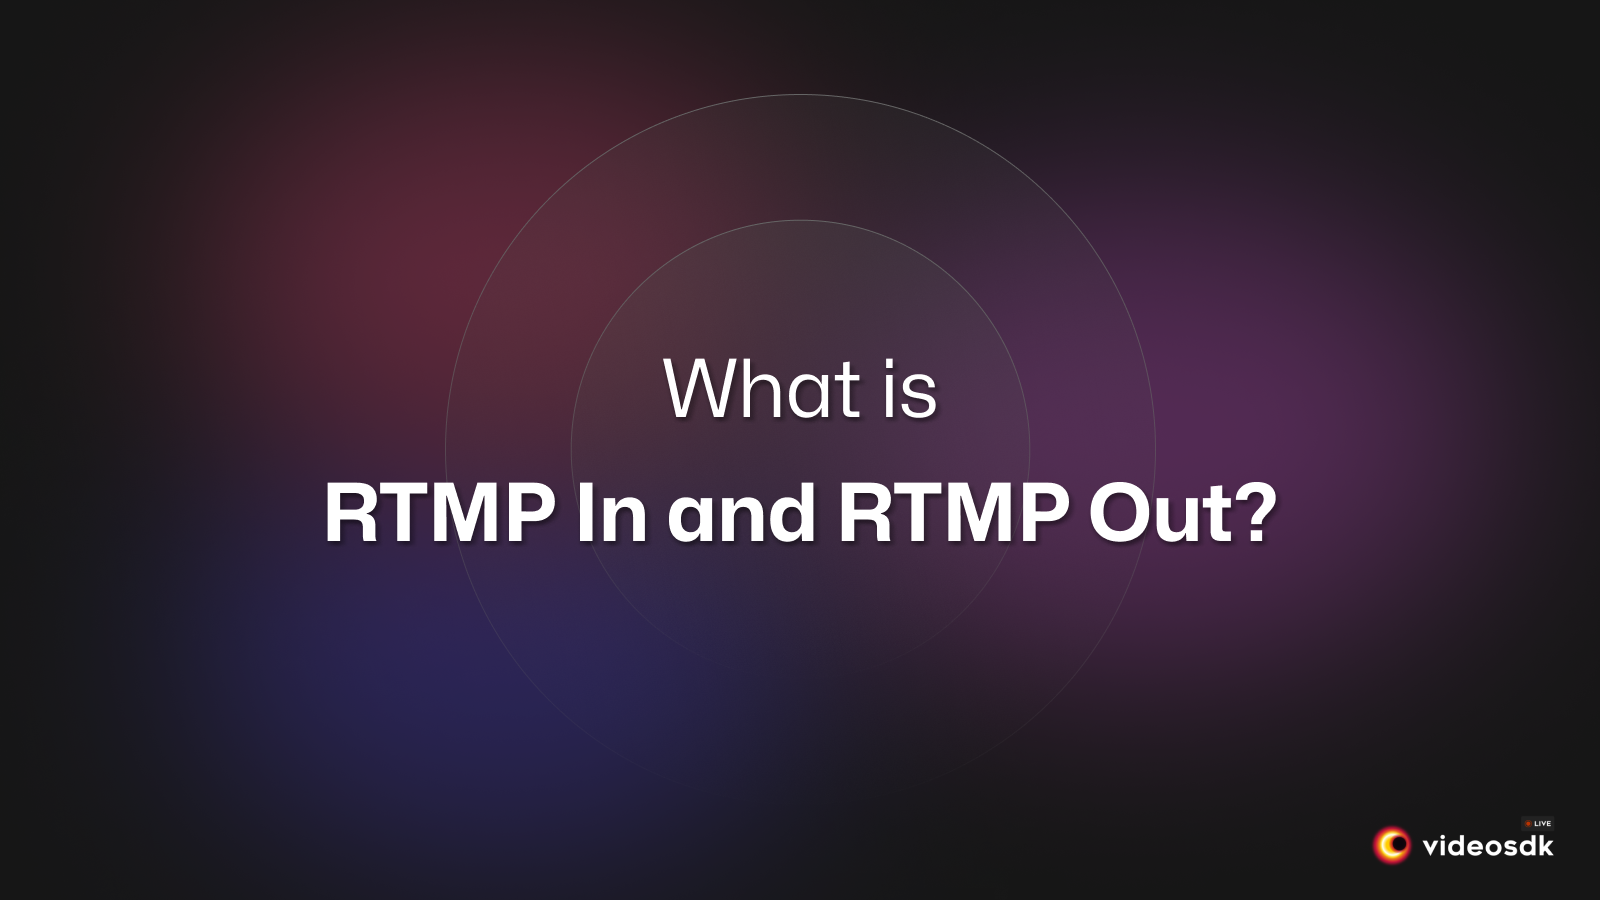 What is RTMP-In and RTMP-Out?